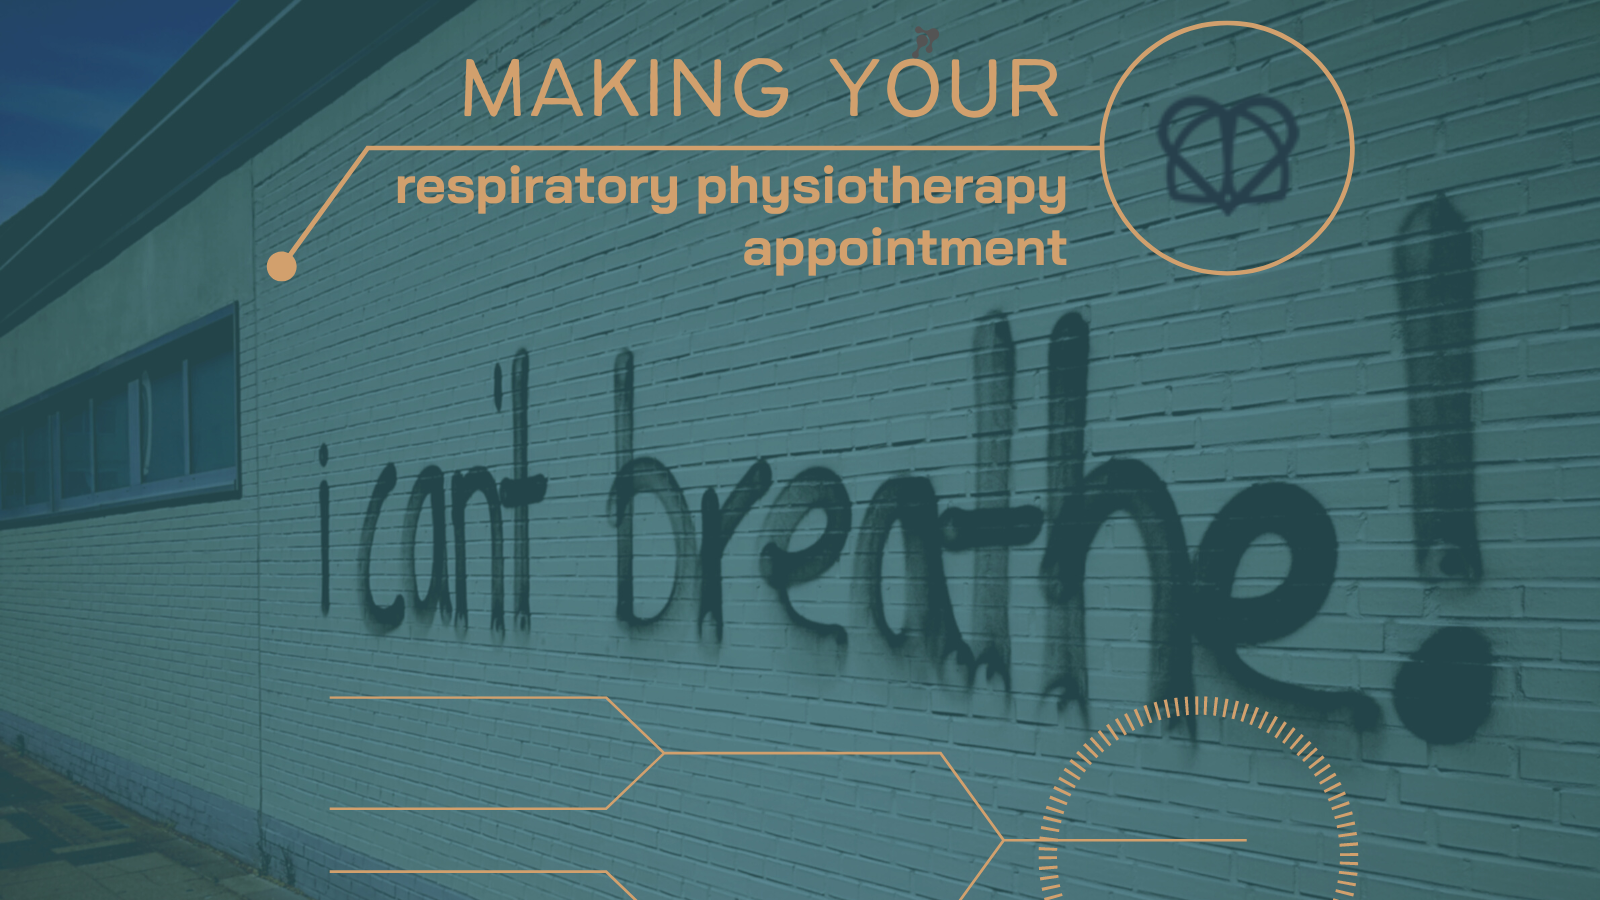 Respiratory physiotherapy appointment